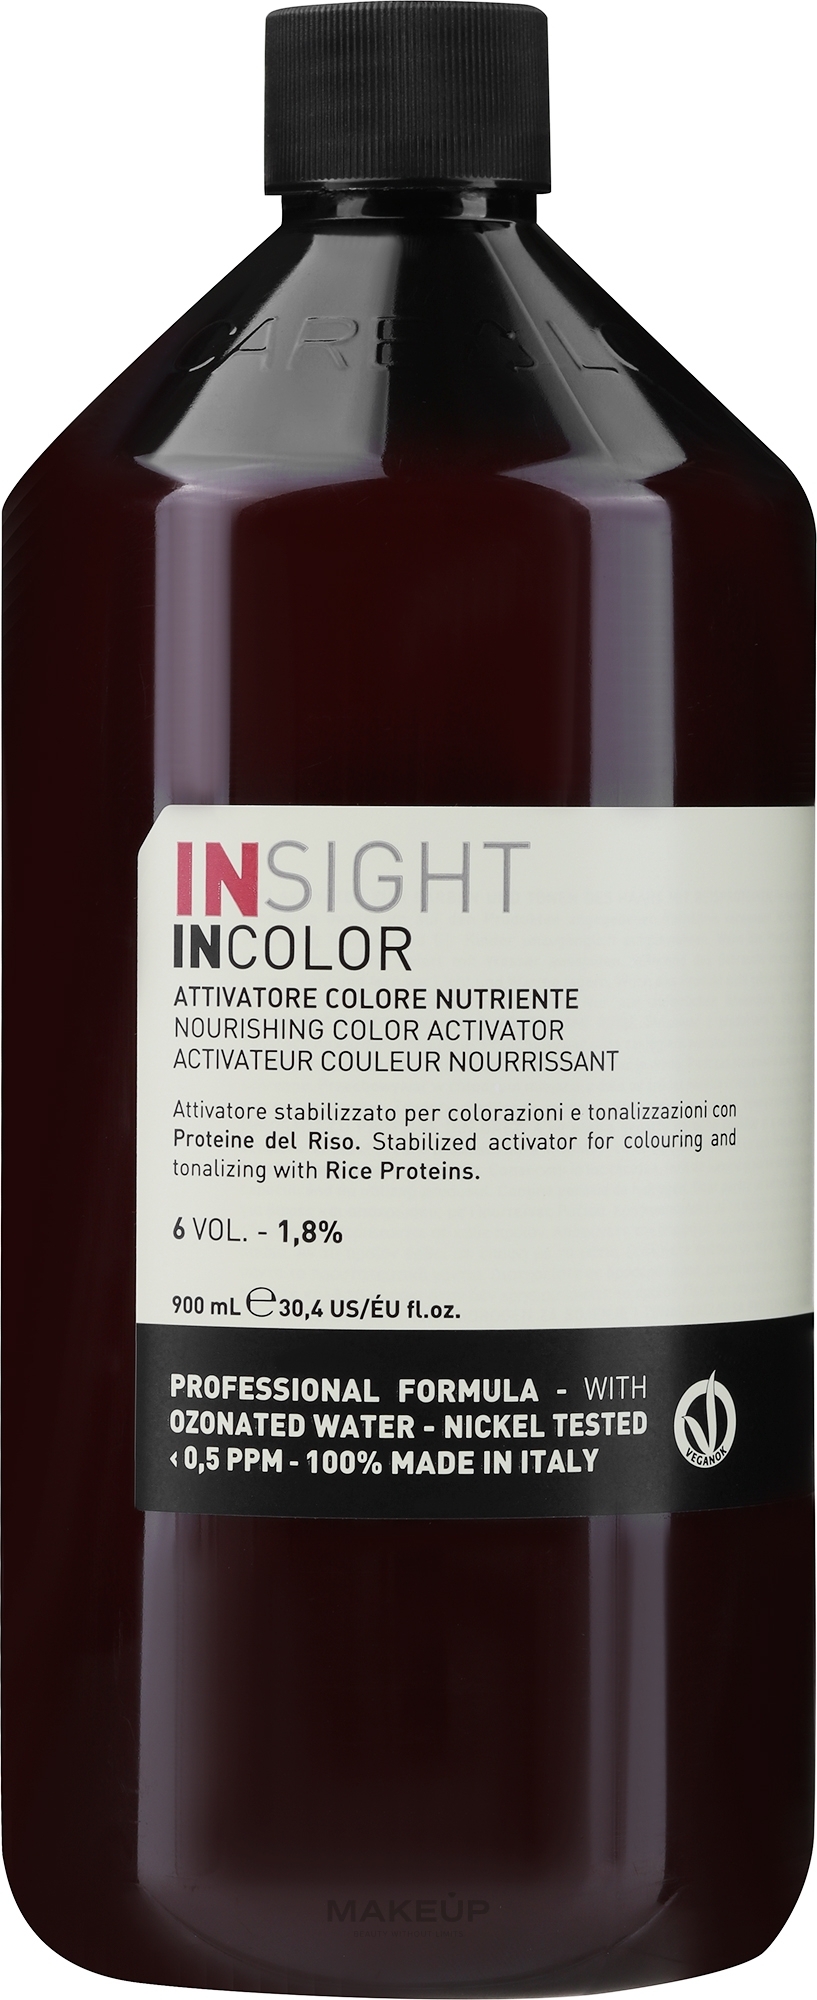 Nourishing Color Activator - Insight Incolor Nourishing Color Activator 6 Vol. — photo 900 ml